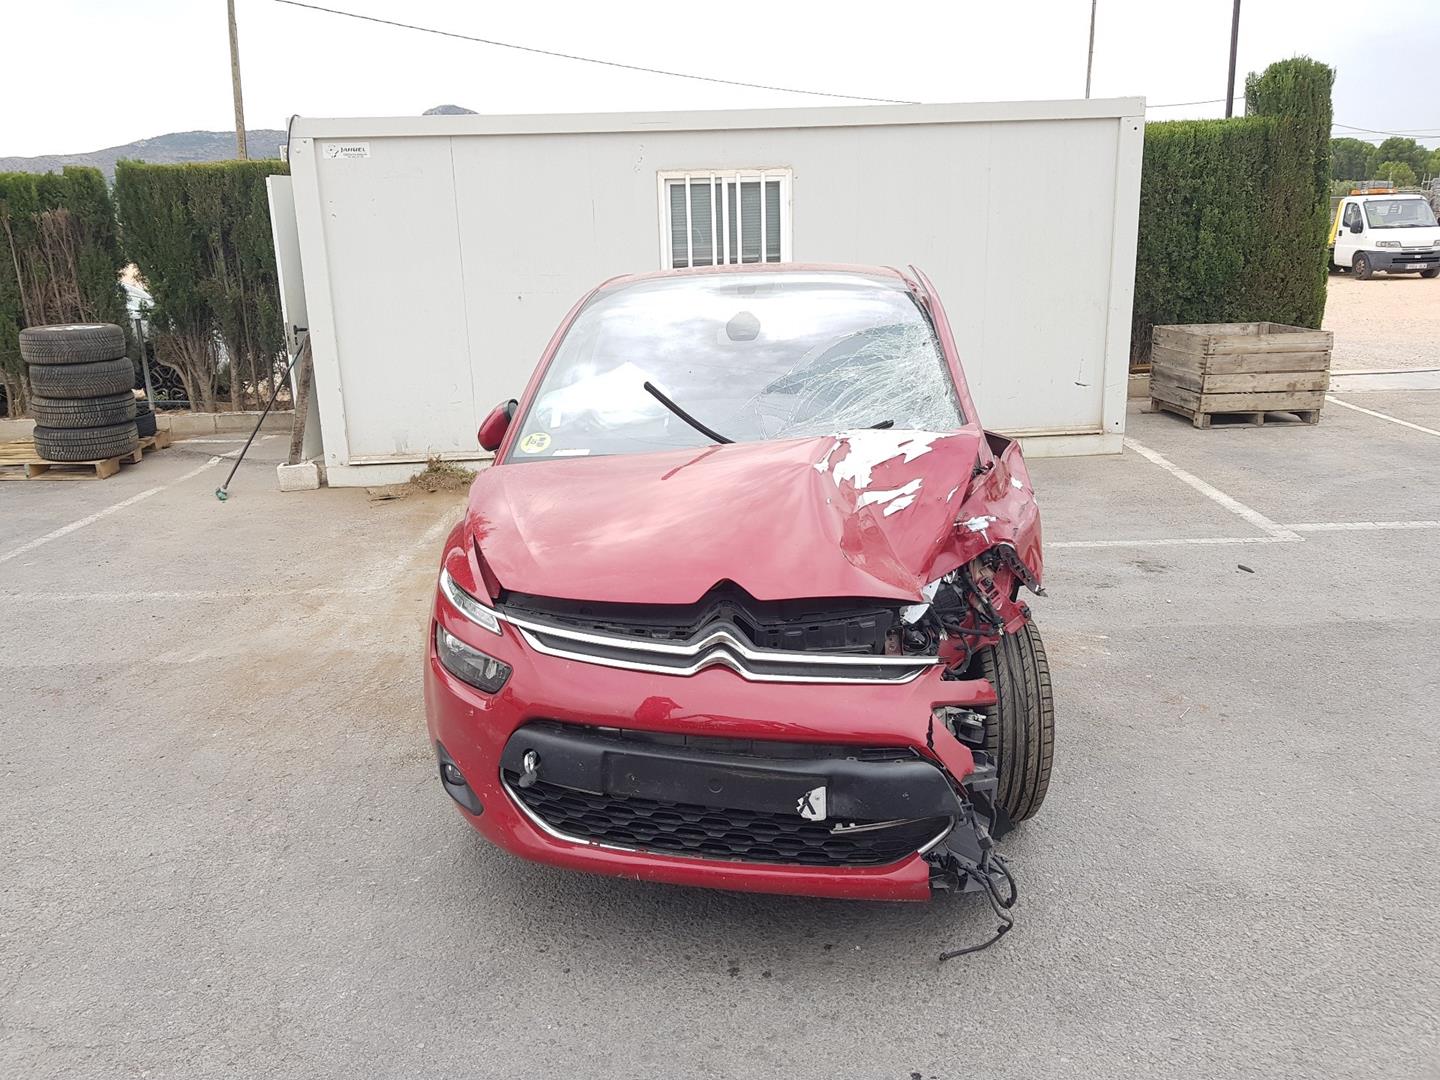 CITROËN C4 Picasso 2 generation (2013-2018) Other Body Parts 9674829780 23660484